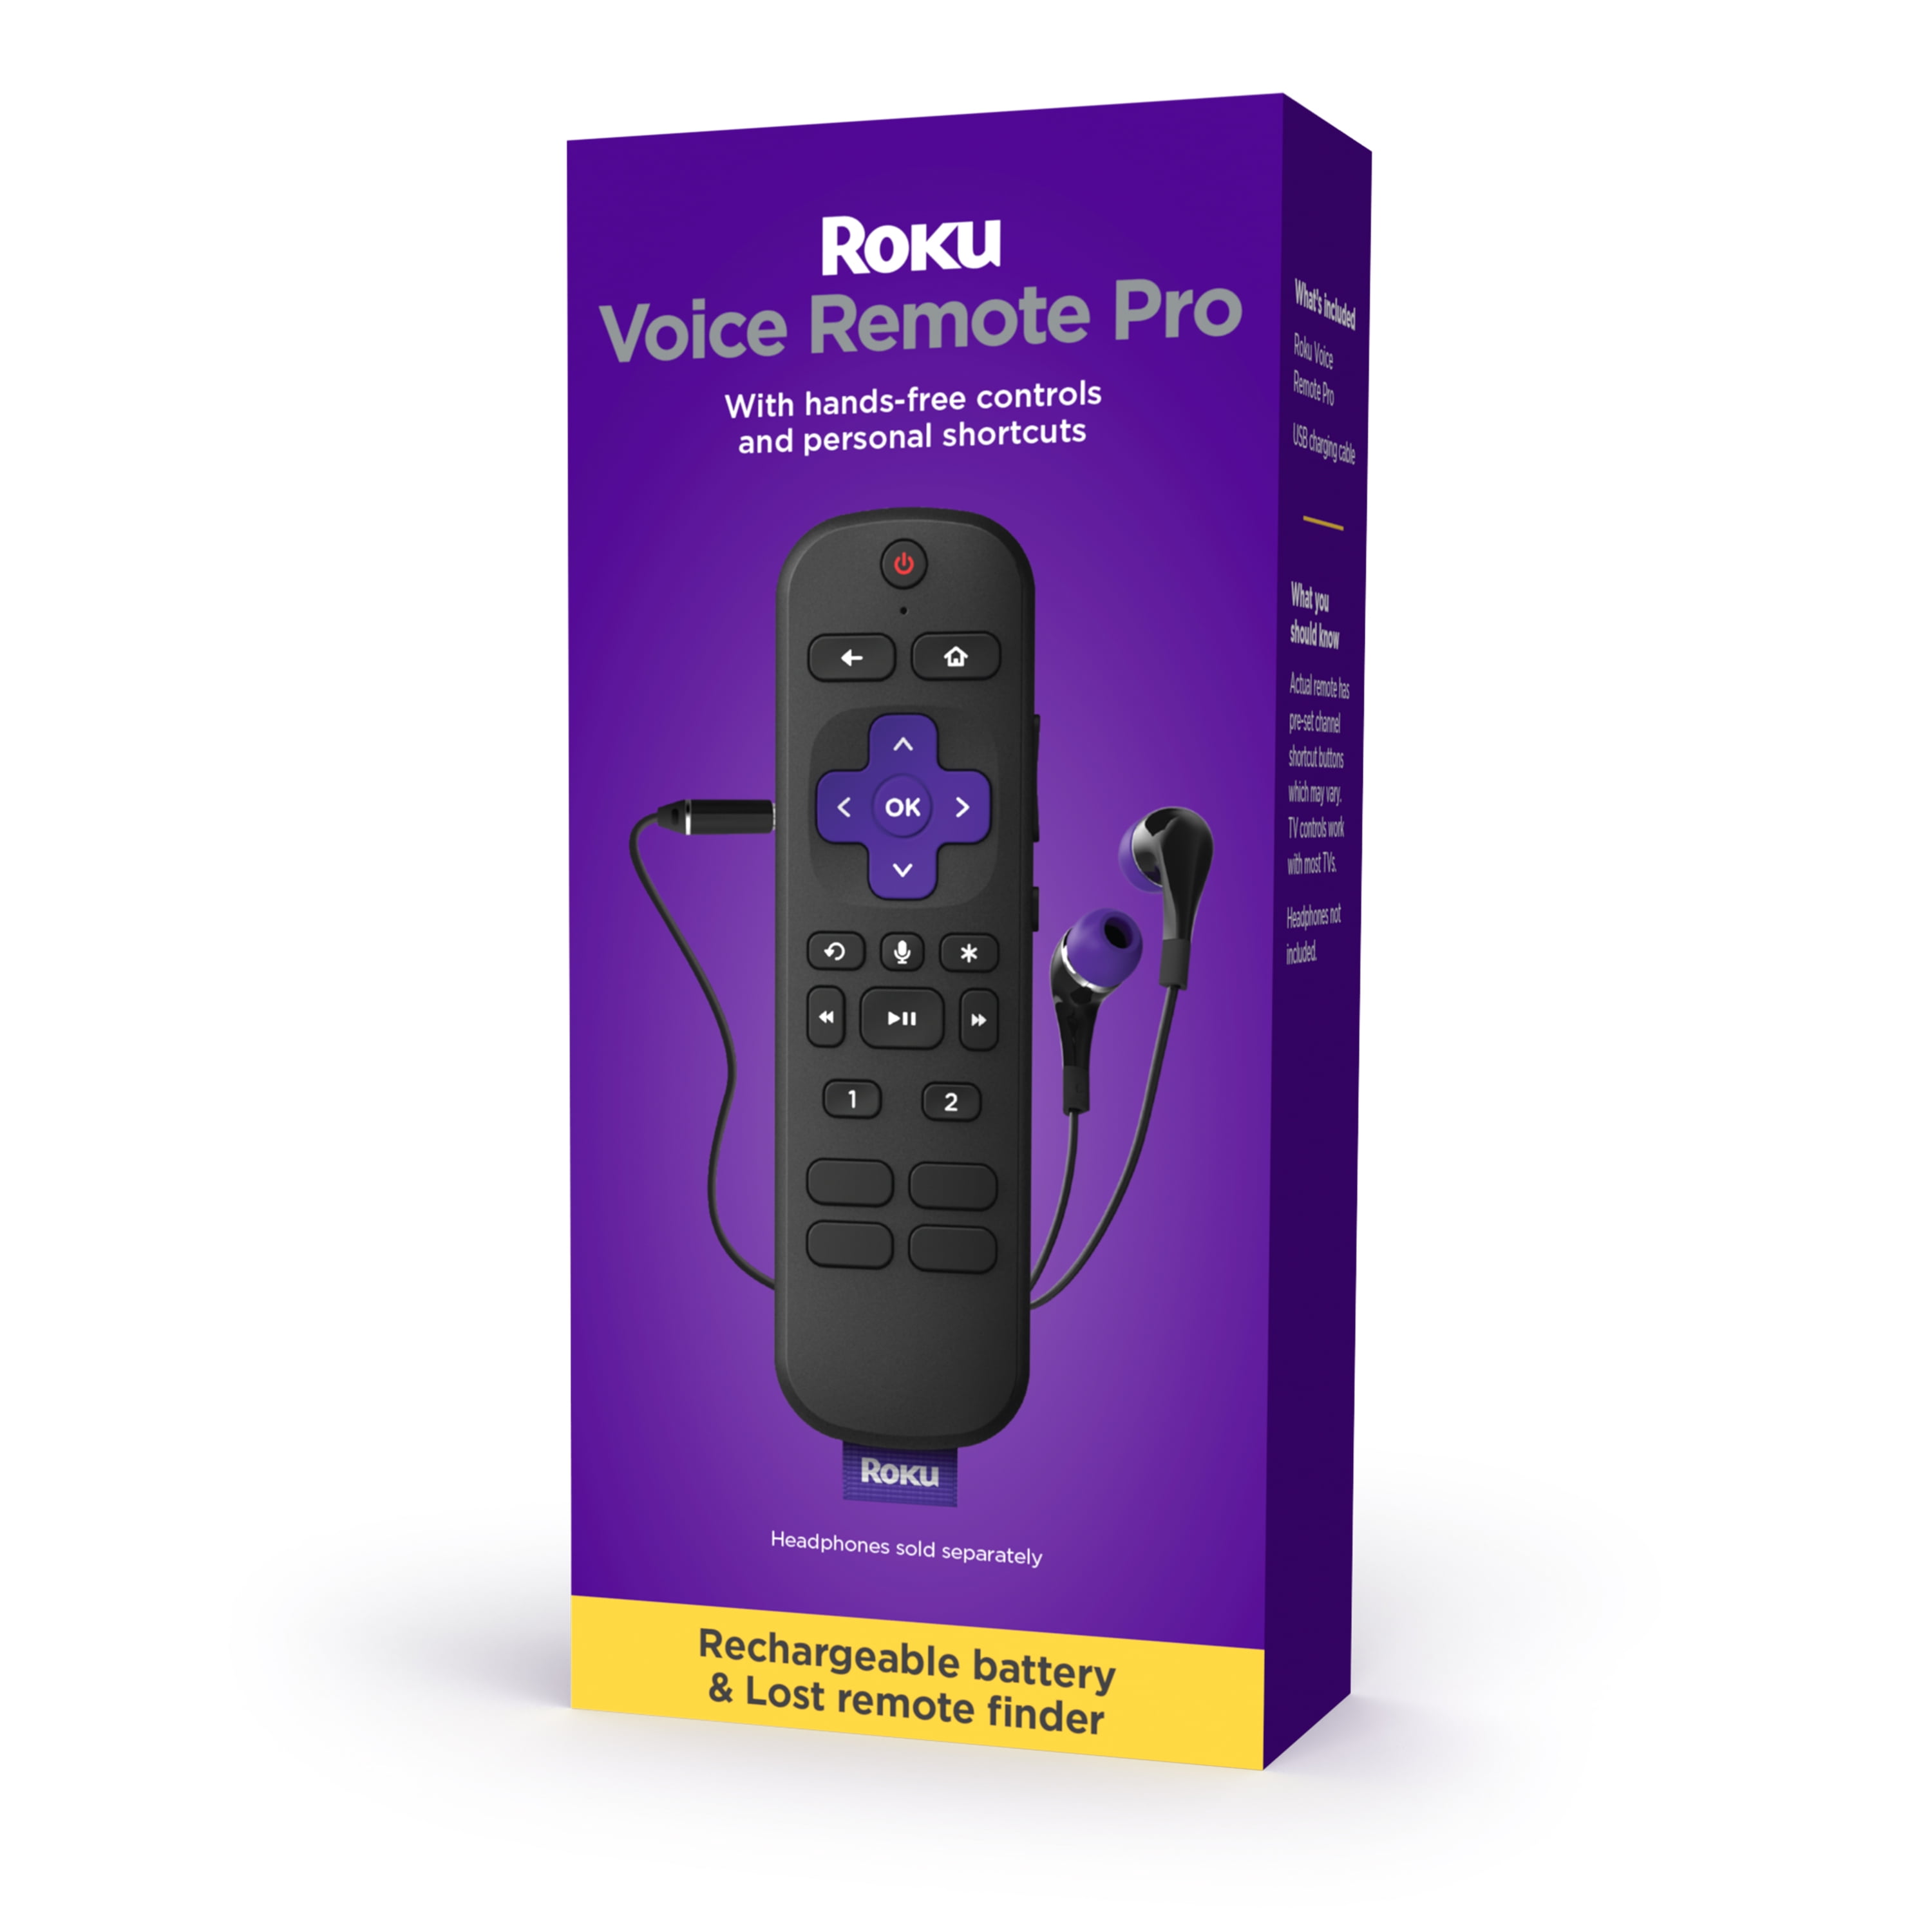 Roku Voice Remote Pro | Rechargeable voice remote with TV controls, lost remote finder, private listening, hands-free voice controls, and shortcut buttons for Roku players, Roku TV, & Roku audio